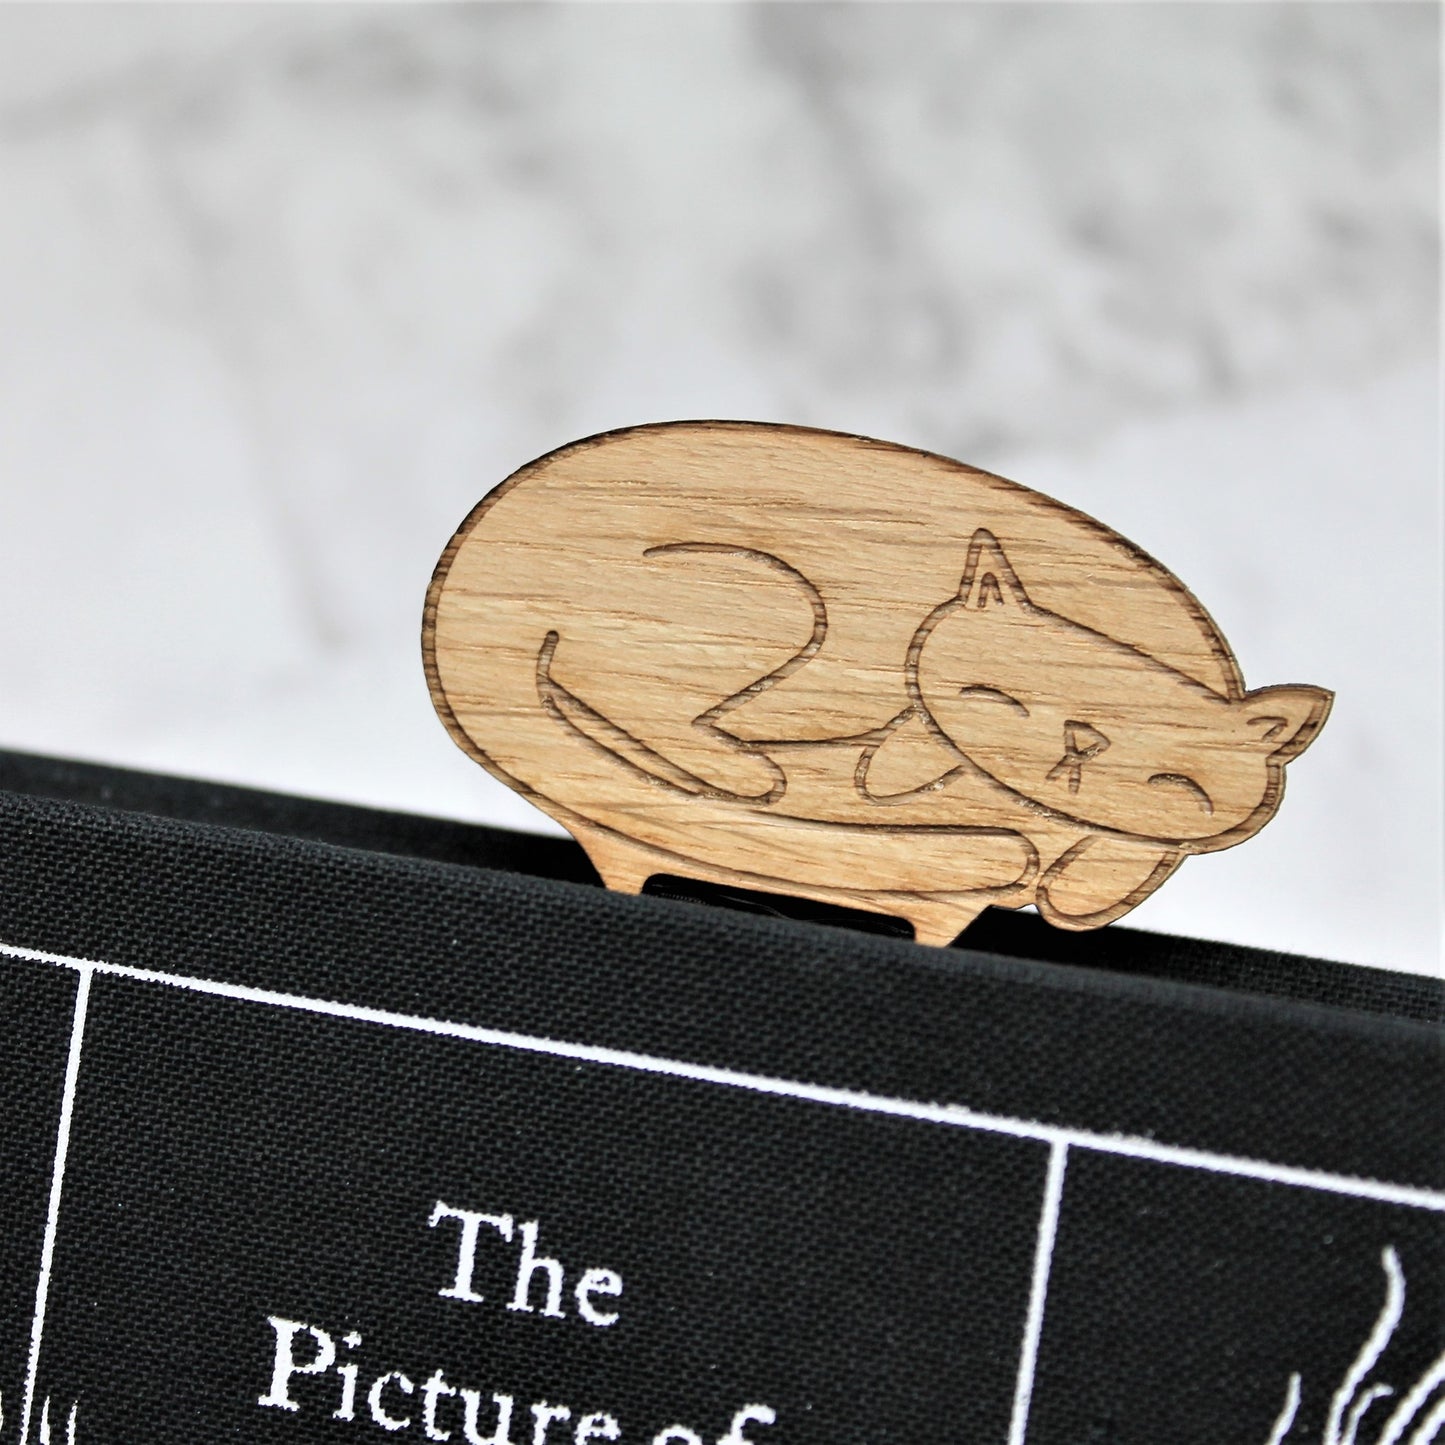 Sleepy cat bookmark made from wood and ribbon, to keep your place in a book